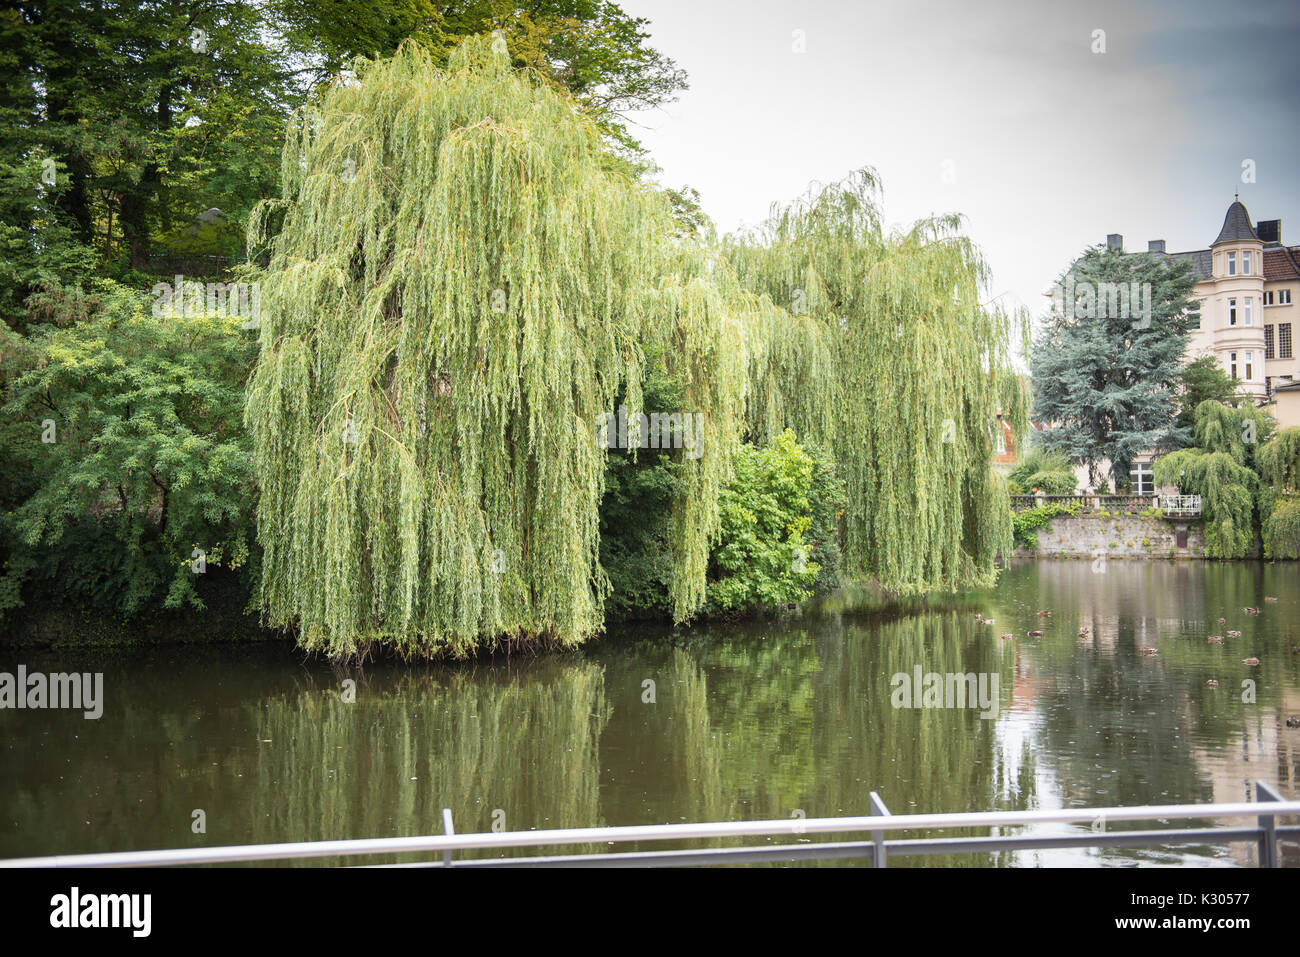 Lake with weeping willows in the castle in the city of Detmold Stock Photo